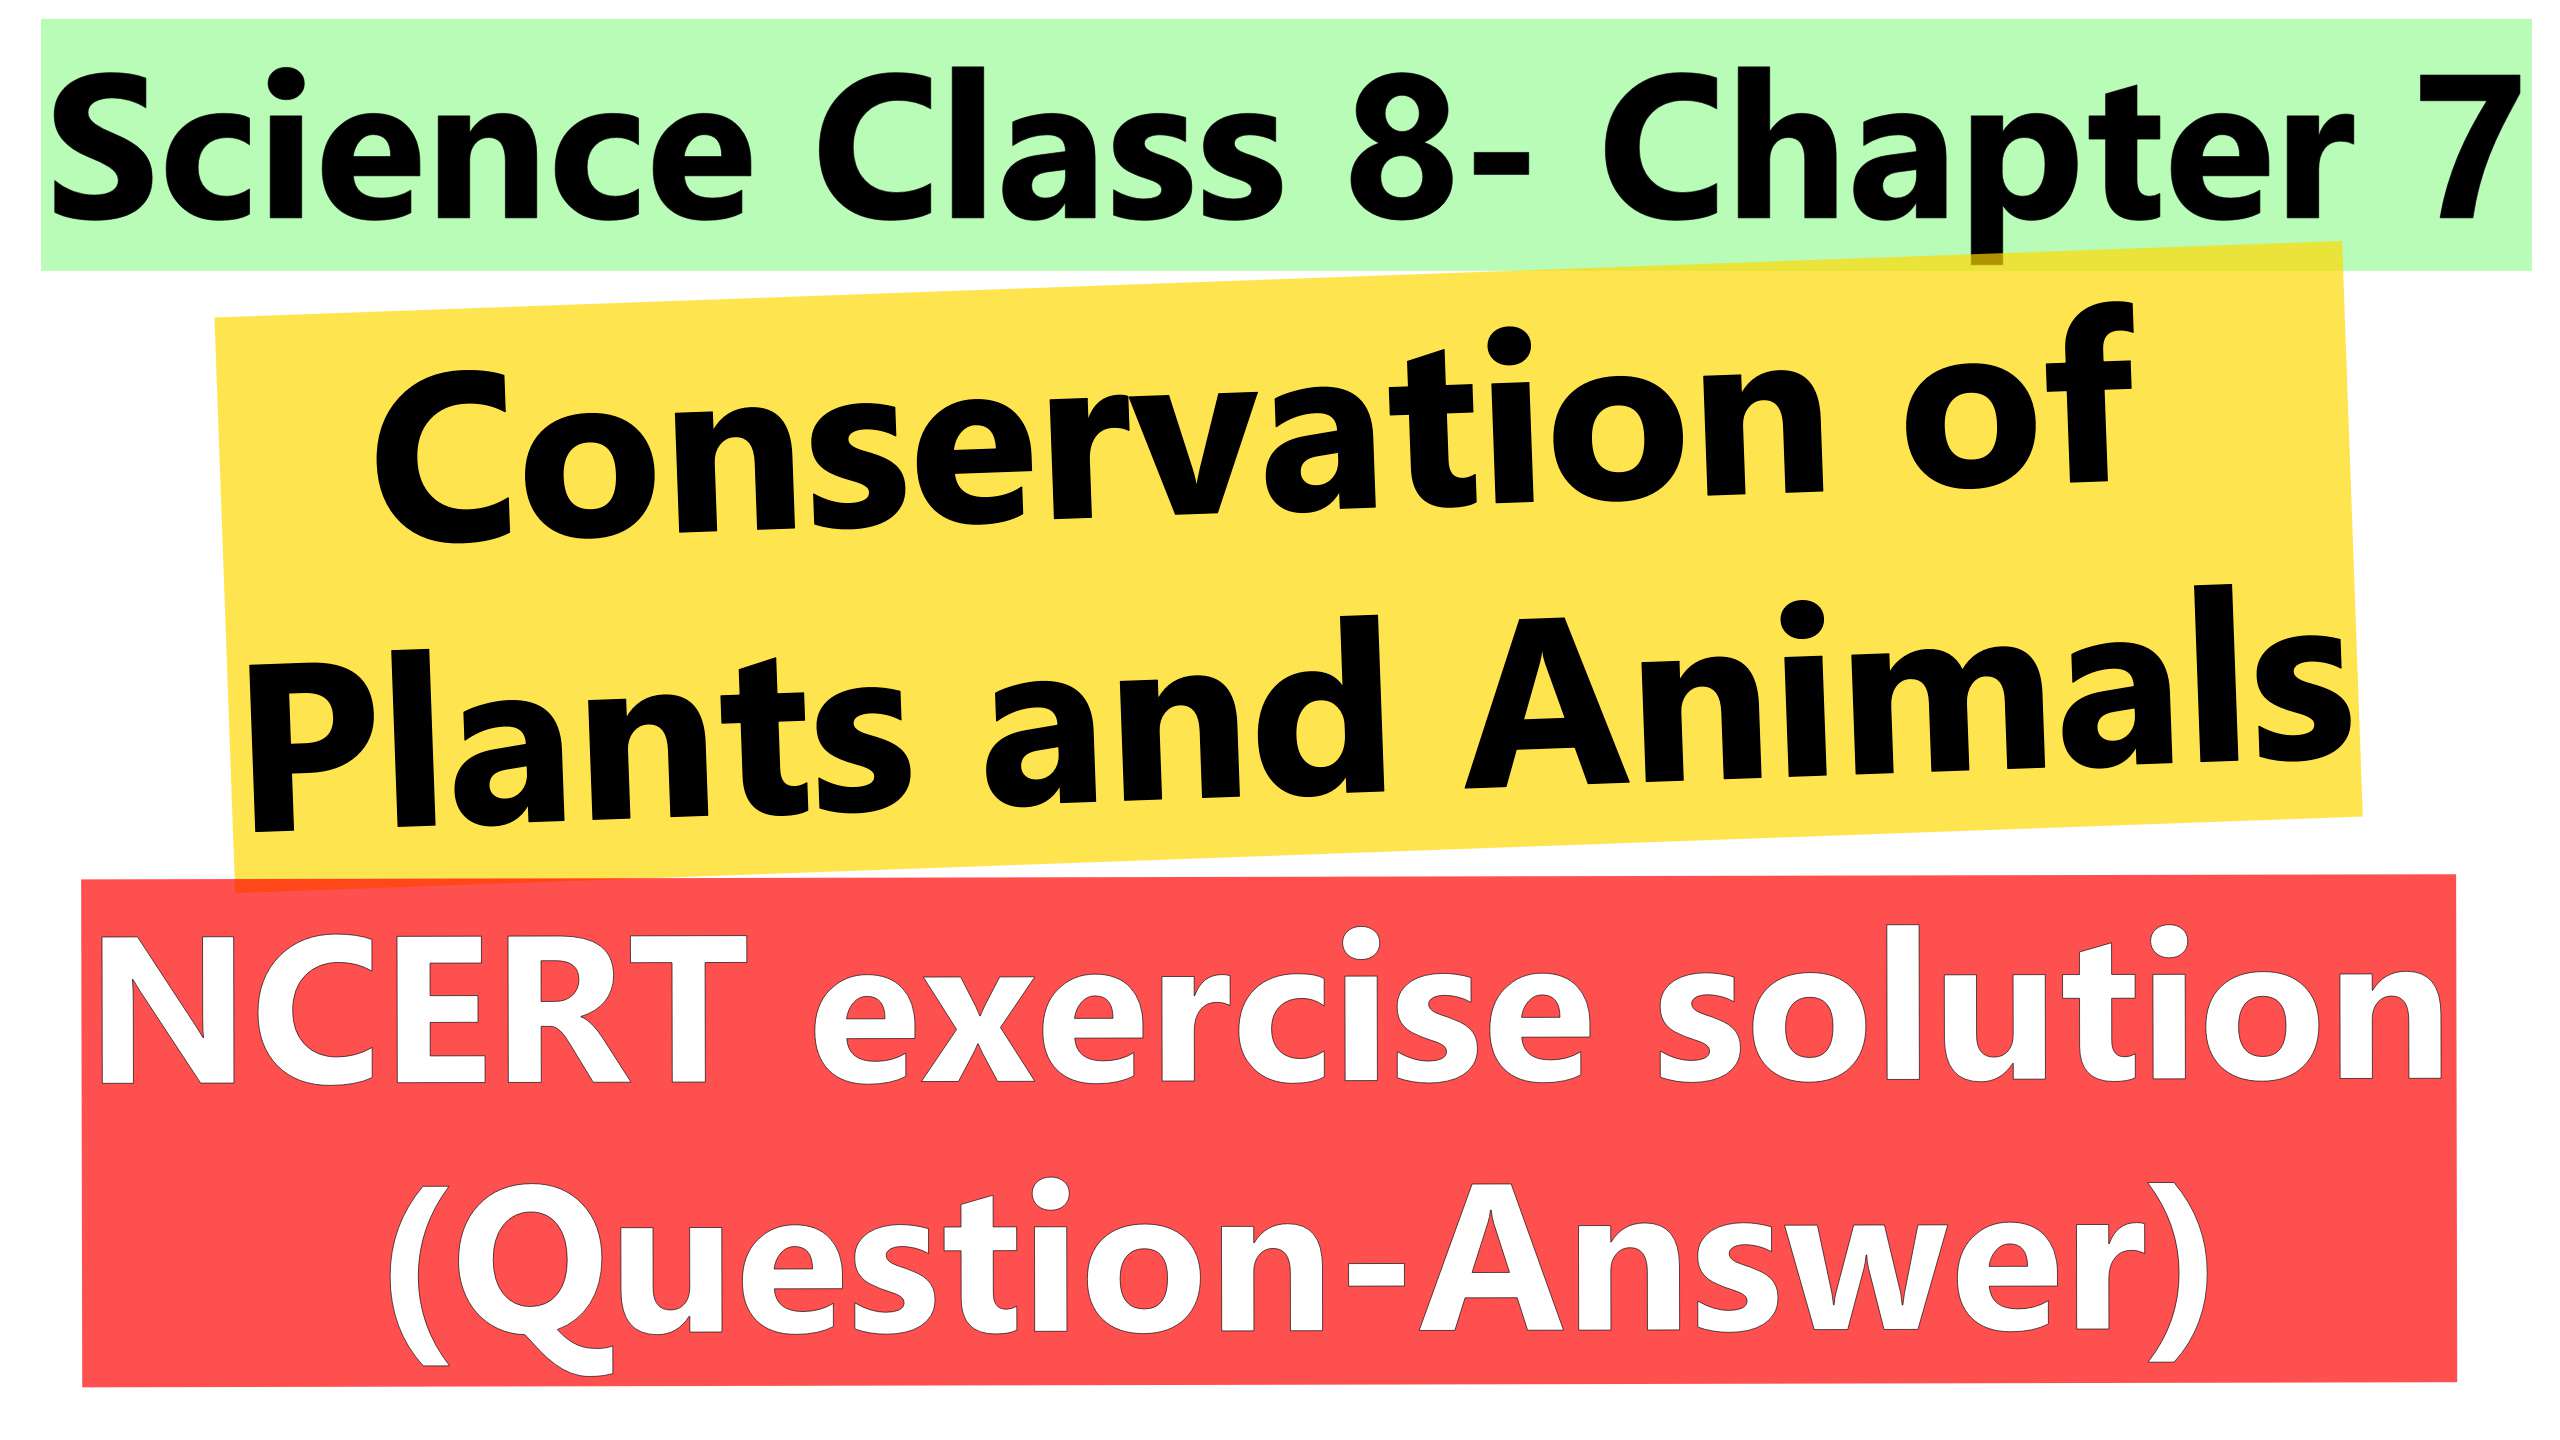 Science Class 8- Chapter 7- Conservation of Plants and Animals- NCERT exercise solution (Question-Answer)